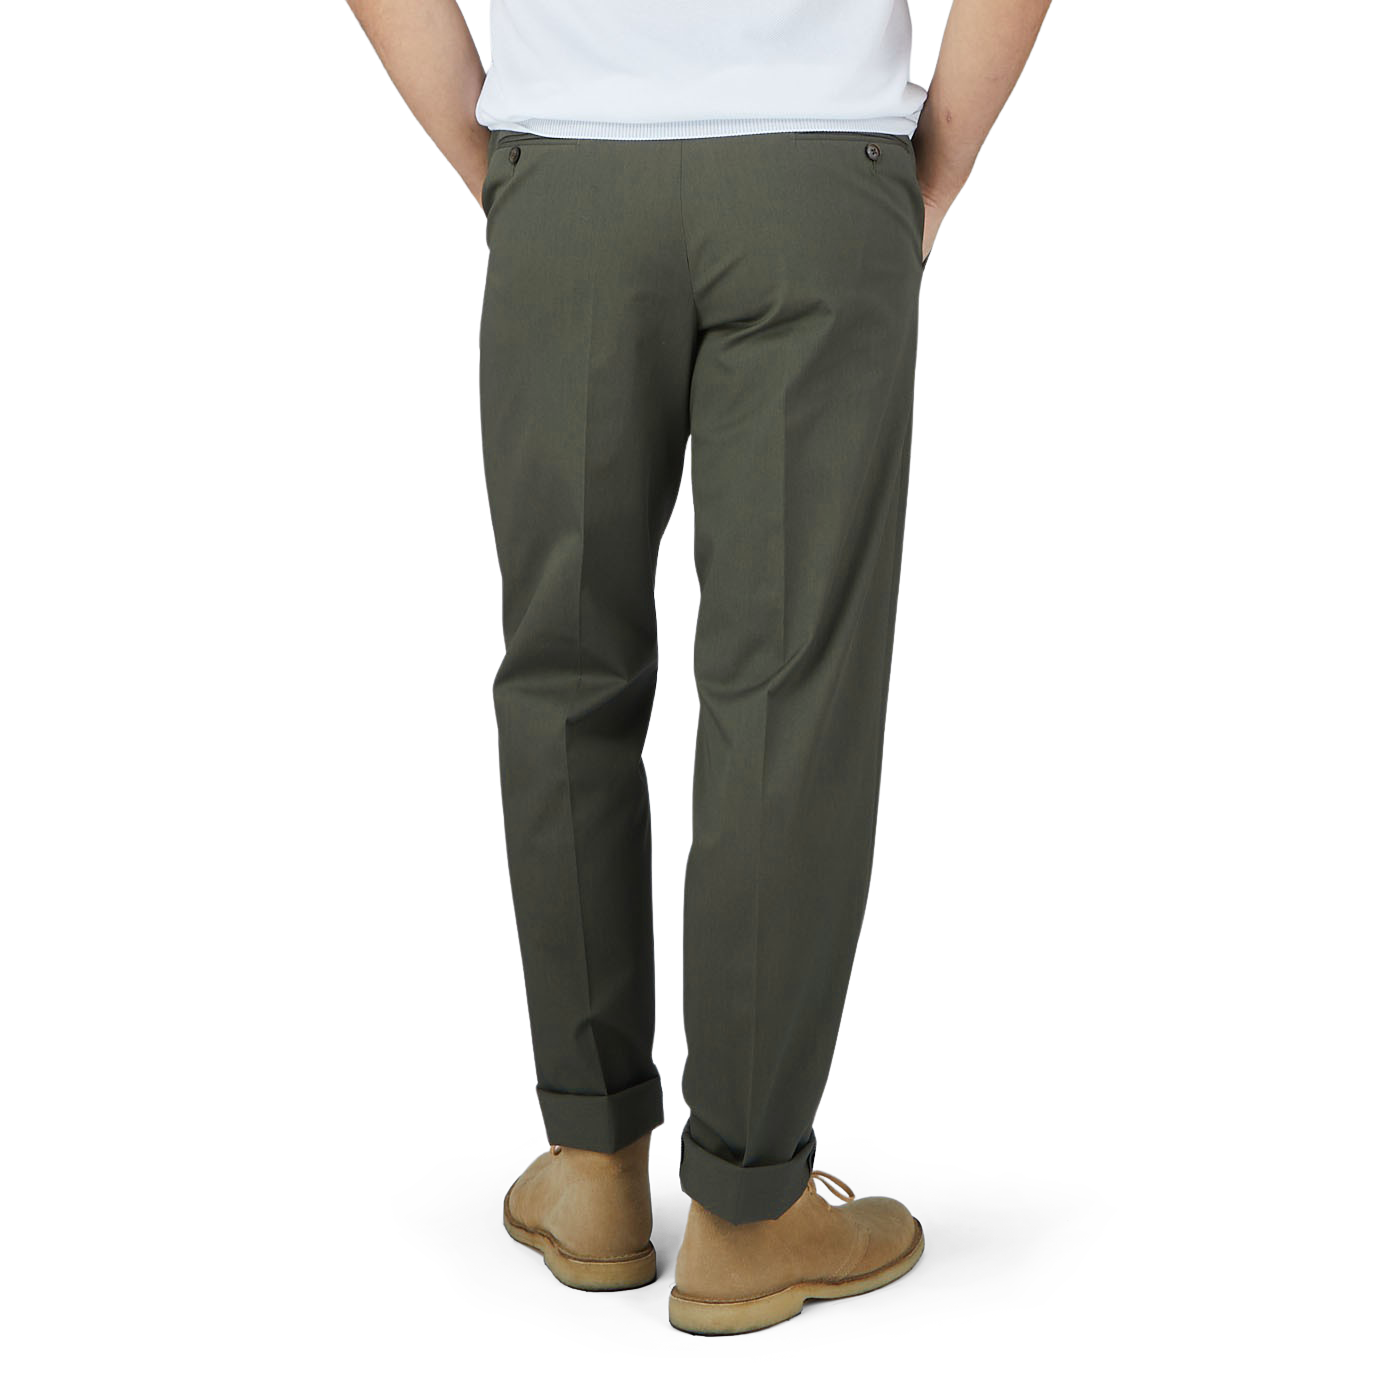 A man in Luigi Bianchi dark green cotton twill flat front trousers, viewed from behind.